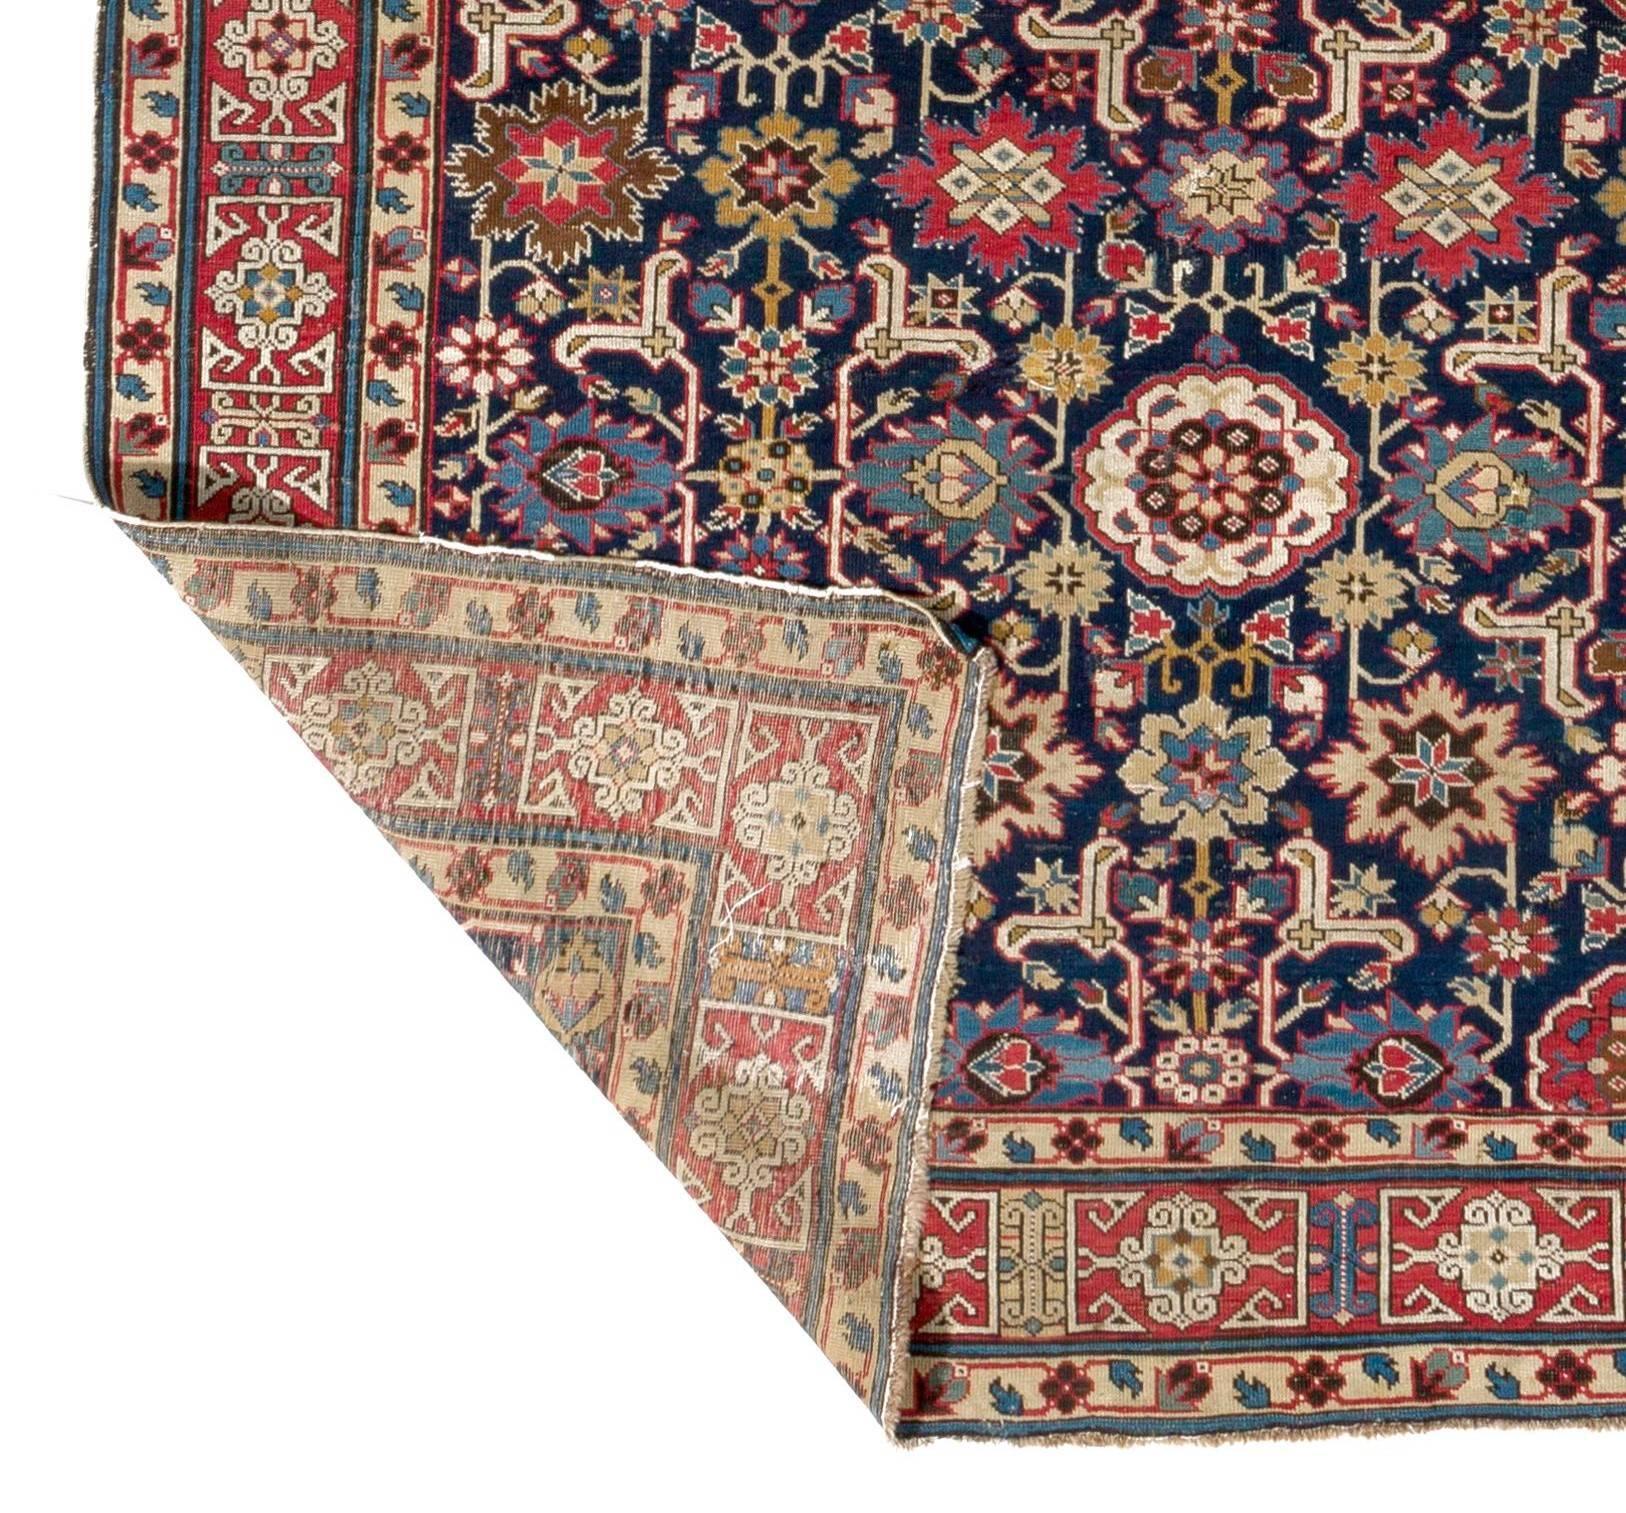 5.3x12 ft Museum Quality Antique Caucasian Kuba Rug, circa 1840 In Good Condition For Sale In Philadelphia, PA